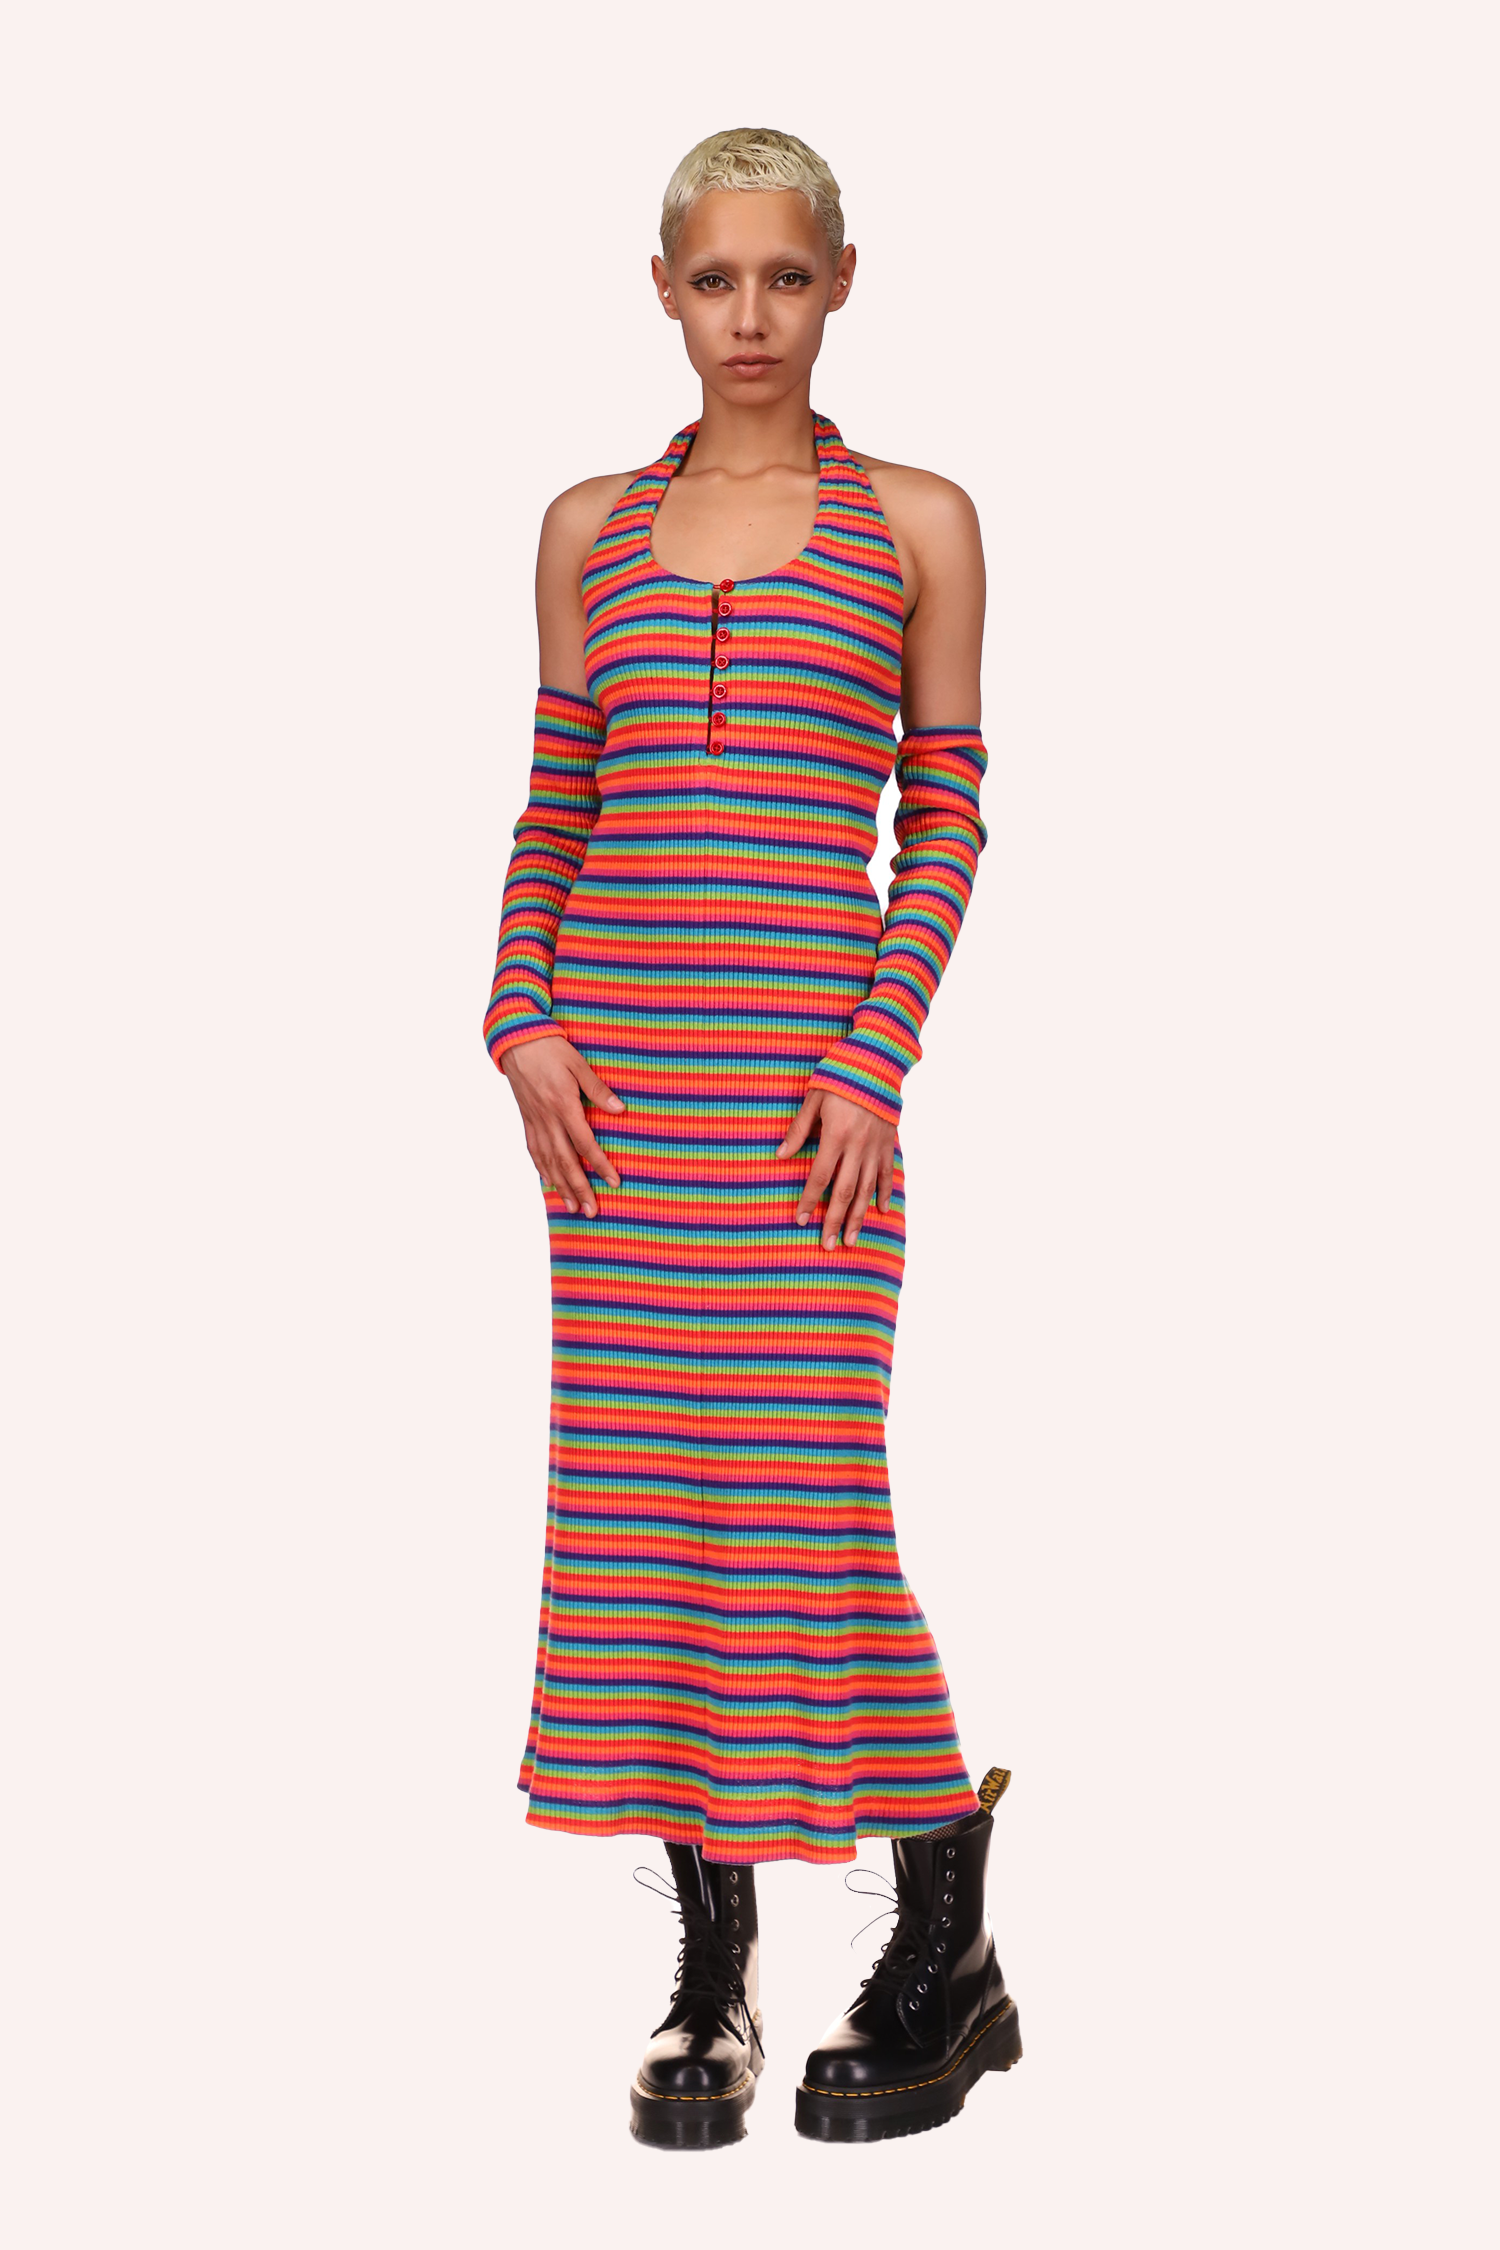 Rainbow Stripe Halter Dress, mid-calf long, sleeveless, bust fabric goes around the neck, 7-button on the front collar